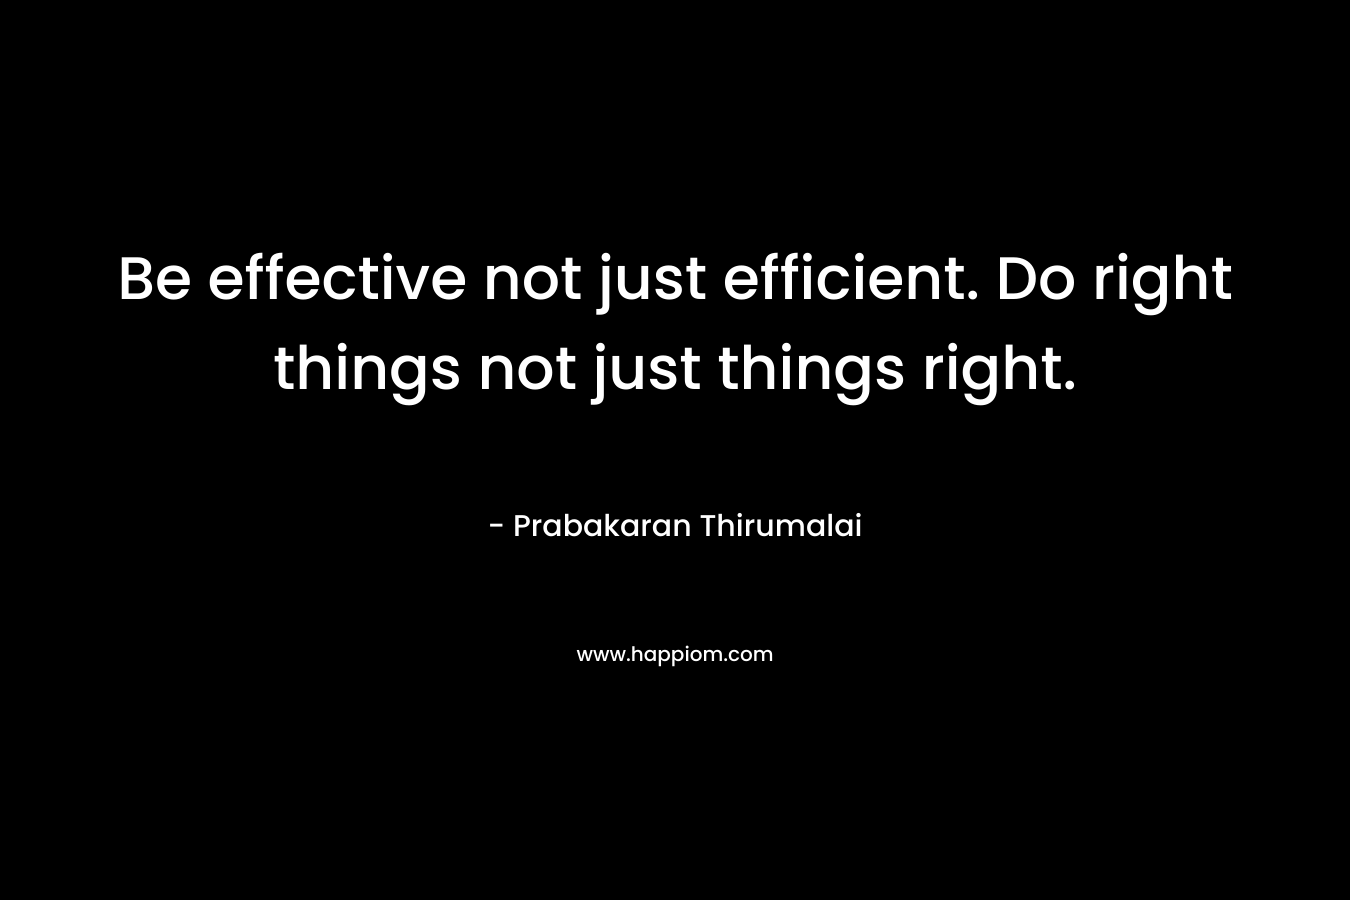 Be effective not just efficient. Do right things not just things right.